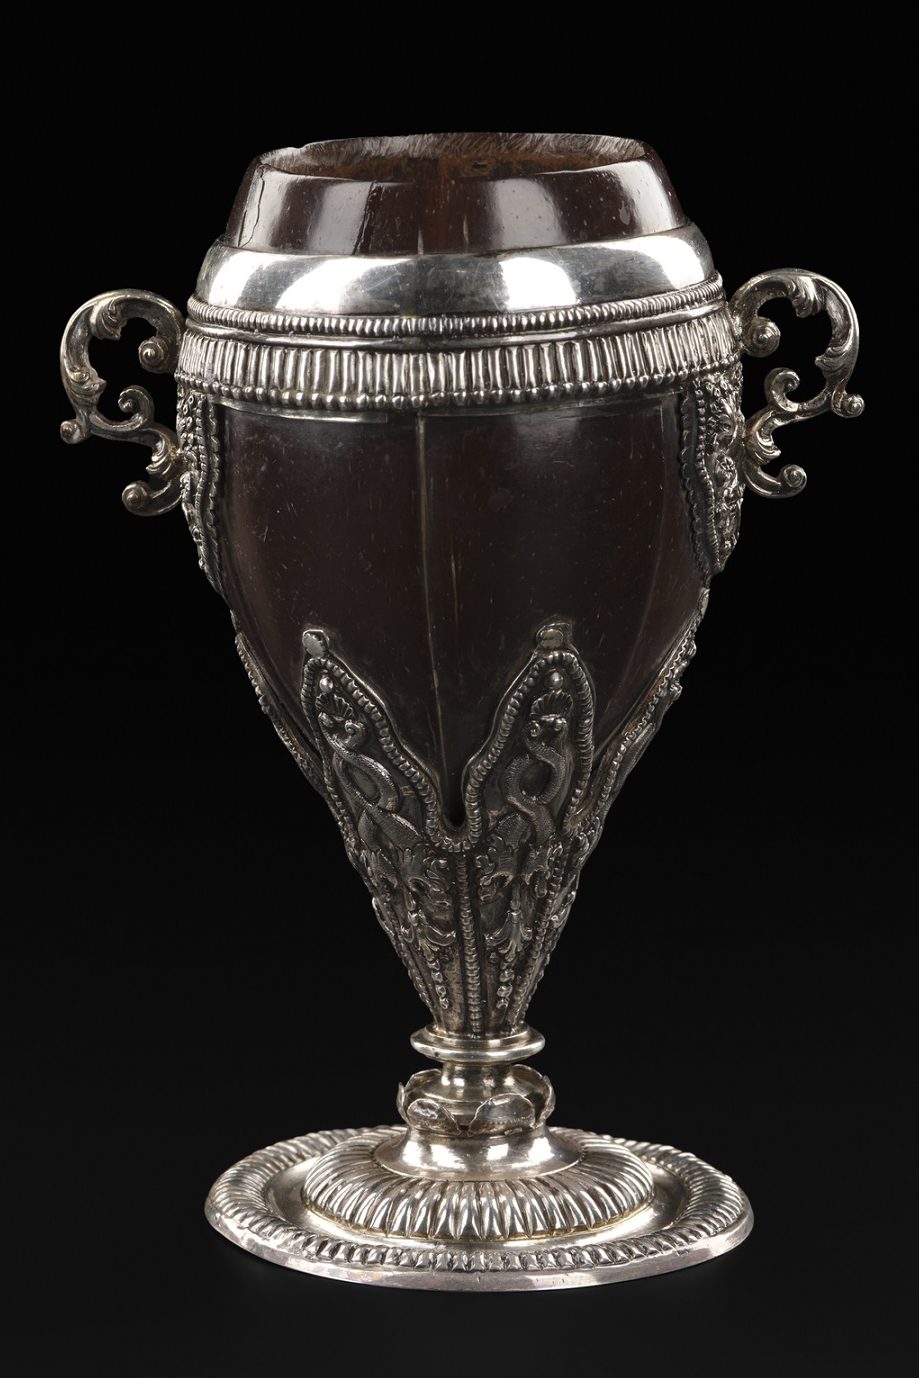 A dark brown polished coconut shell made into an ornate silver drinking cup. A silver rim is at the top, with a silver handle on each side and ornate silver engravings on the stem.